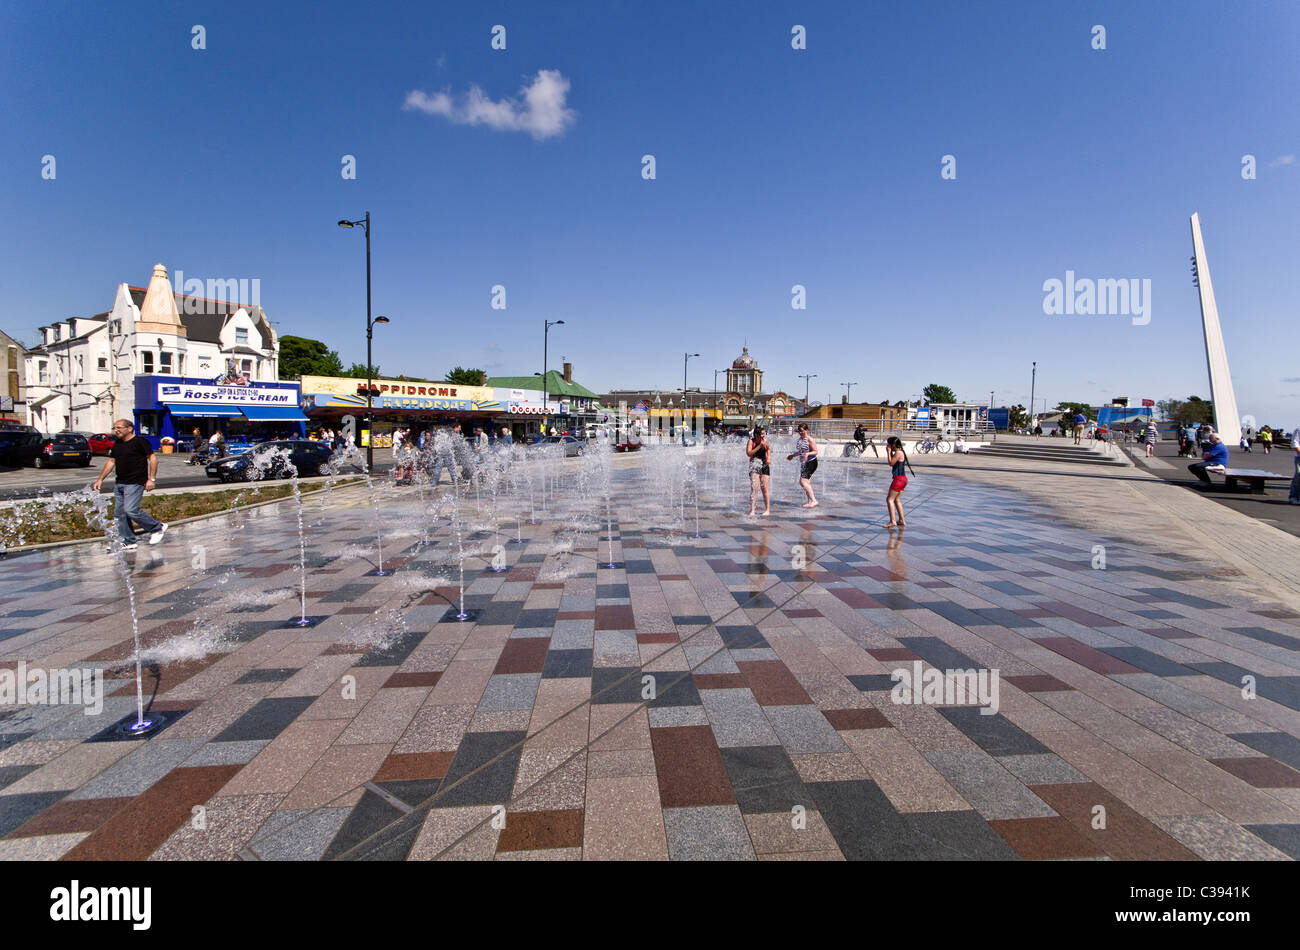 Fountains at the seaside promenade in Southend-on-Sea Essex, England, UK Stock Photo